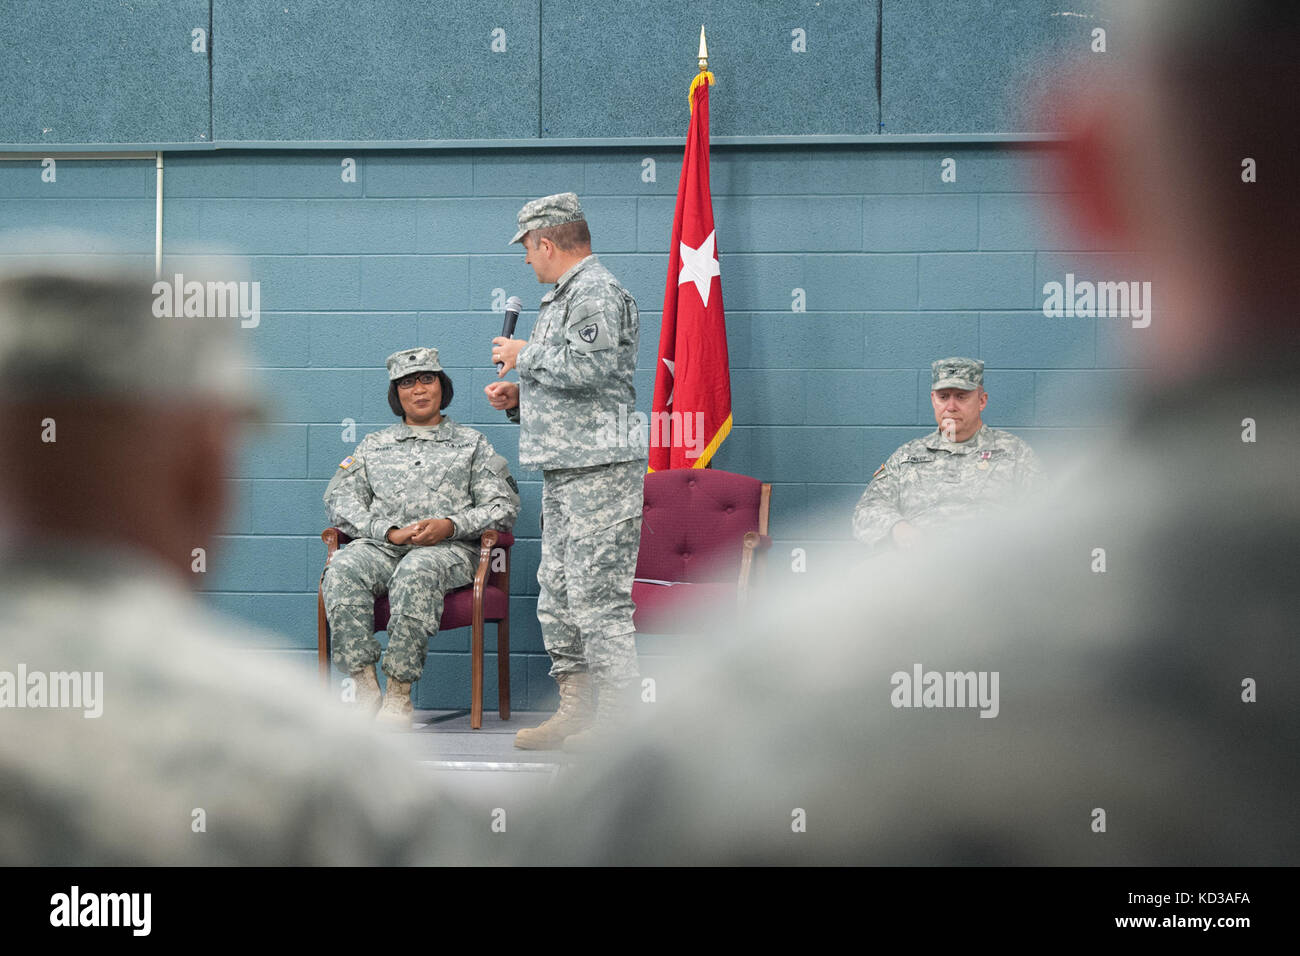 The S.C. Army National Guard’s 218th Leadership Regiment held its change of command ceremony Aug. 1, 2015, at McCrady Training Center, Eastover, S.C., to honor outgoing commander, U.S. Army Col. James R. Finley, and incoming commander, U.S. Army Lt. Col. Renita L. Berry.  Lt. Col. Berry’s distinguished 28-year military career includes deployments in support of Operation Joint Guard, Bosnia and Operation Joint Guardian, Kosovo. (U.S. Army National Guard photo by Sgt. Brian Calhoun/Released) Stock Photo